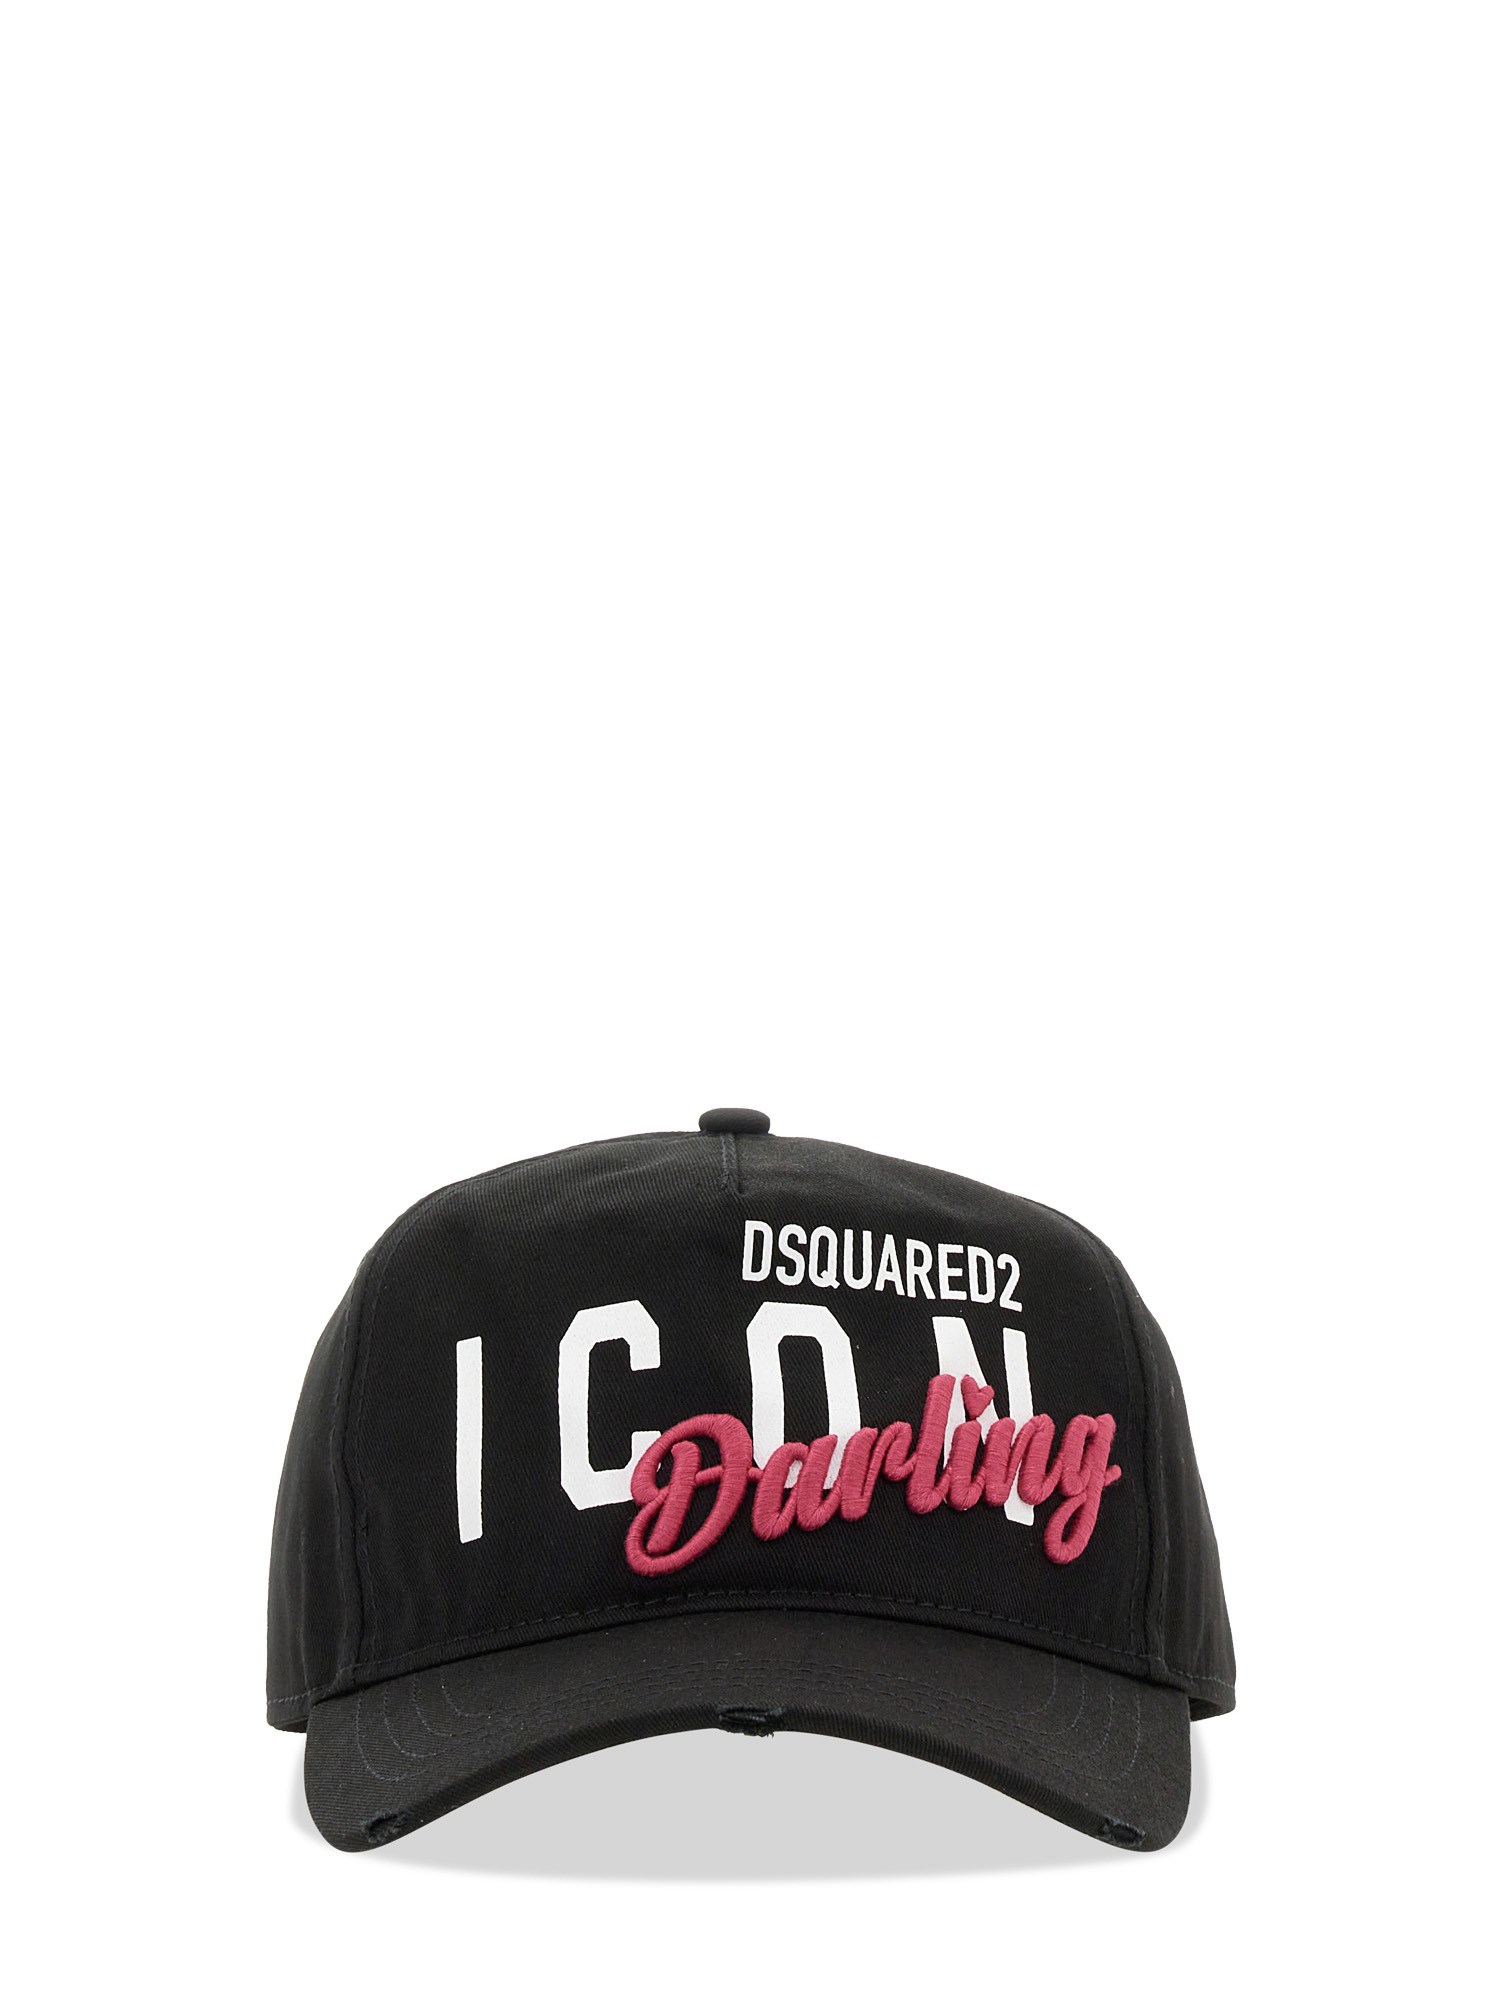 dsquared dsquared baseball hat with d2 patch